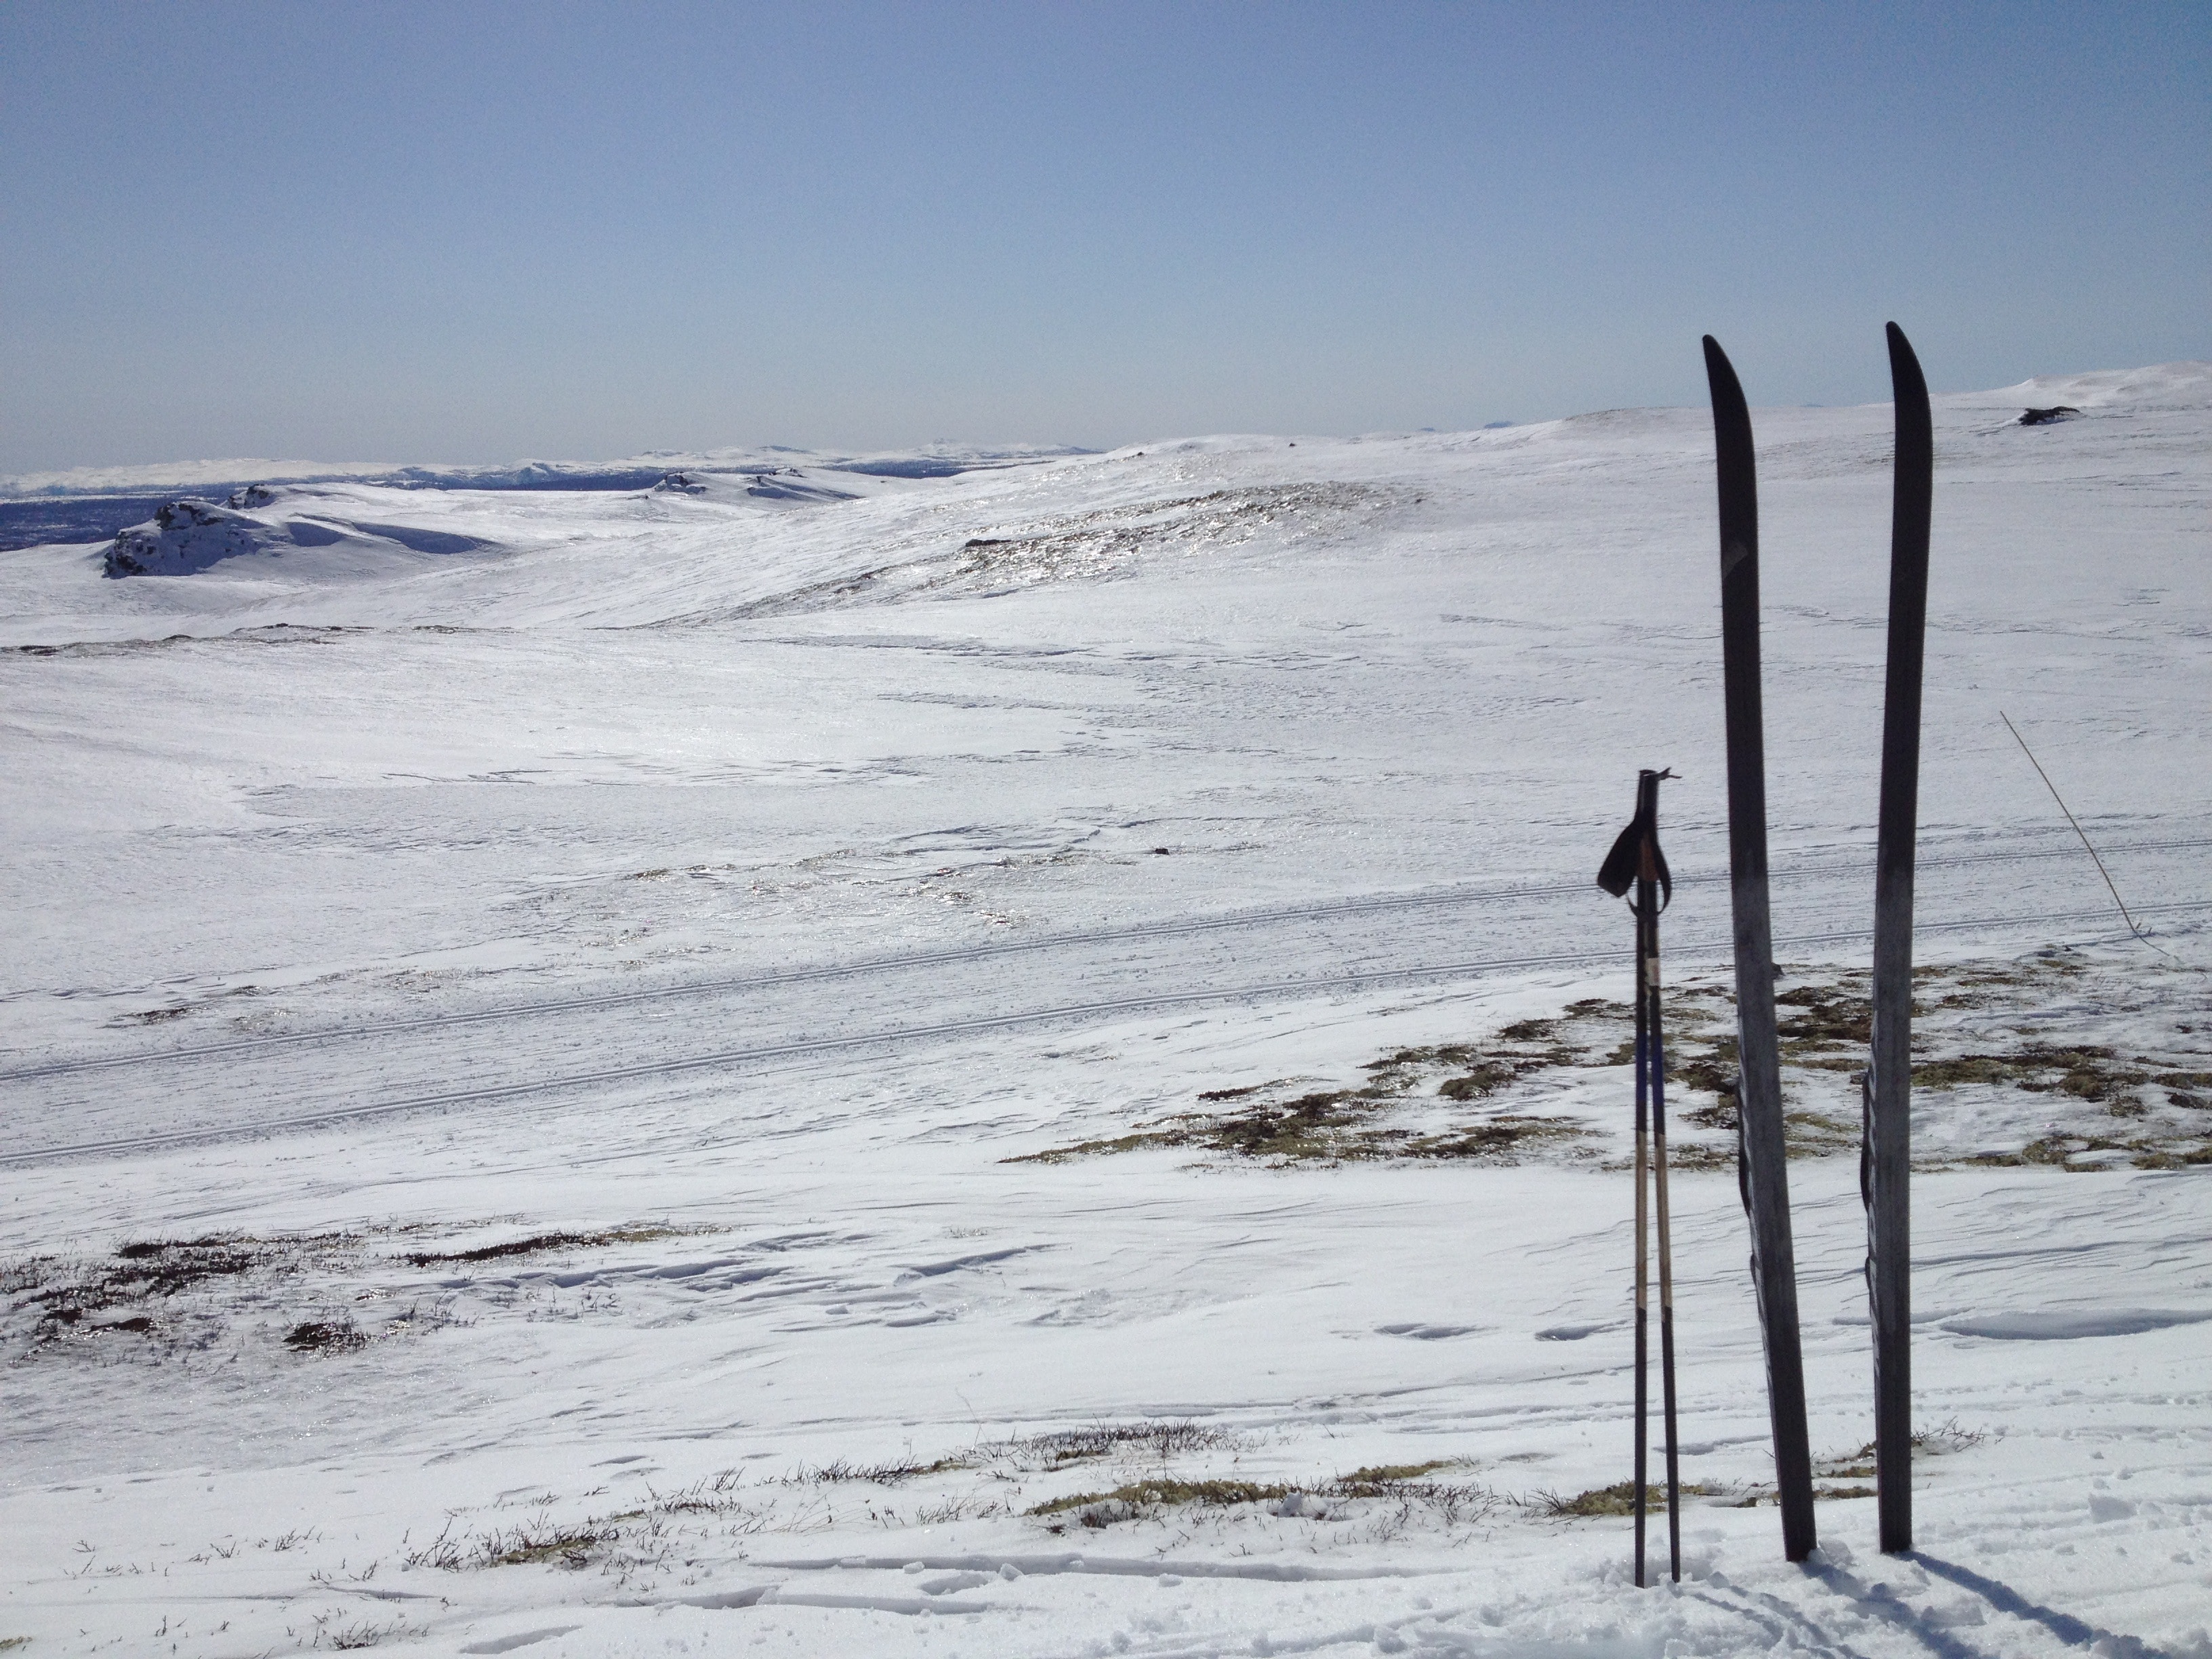 four wooden poles surrounded by snow